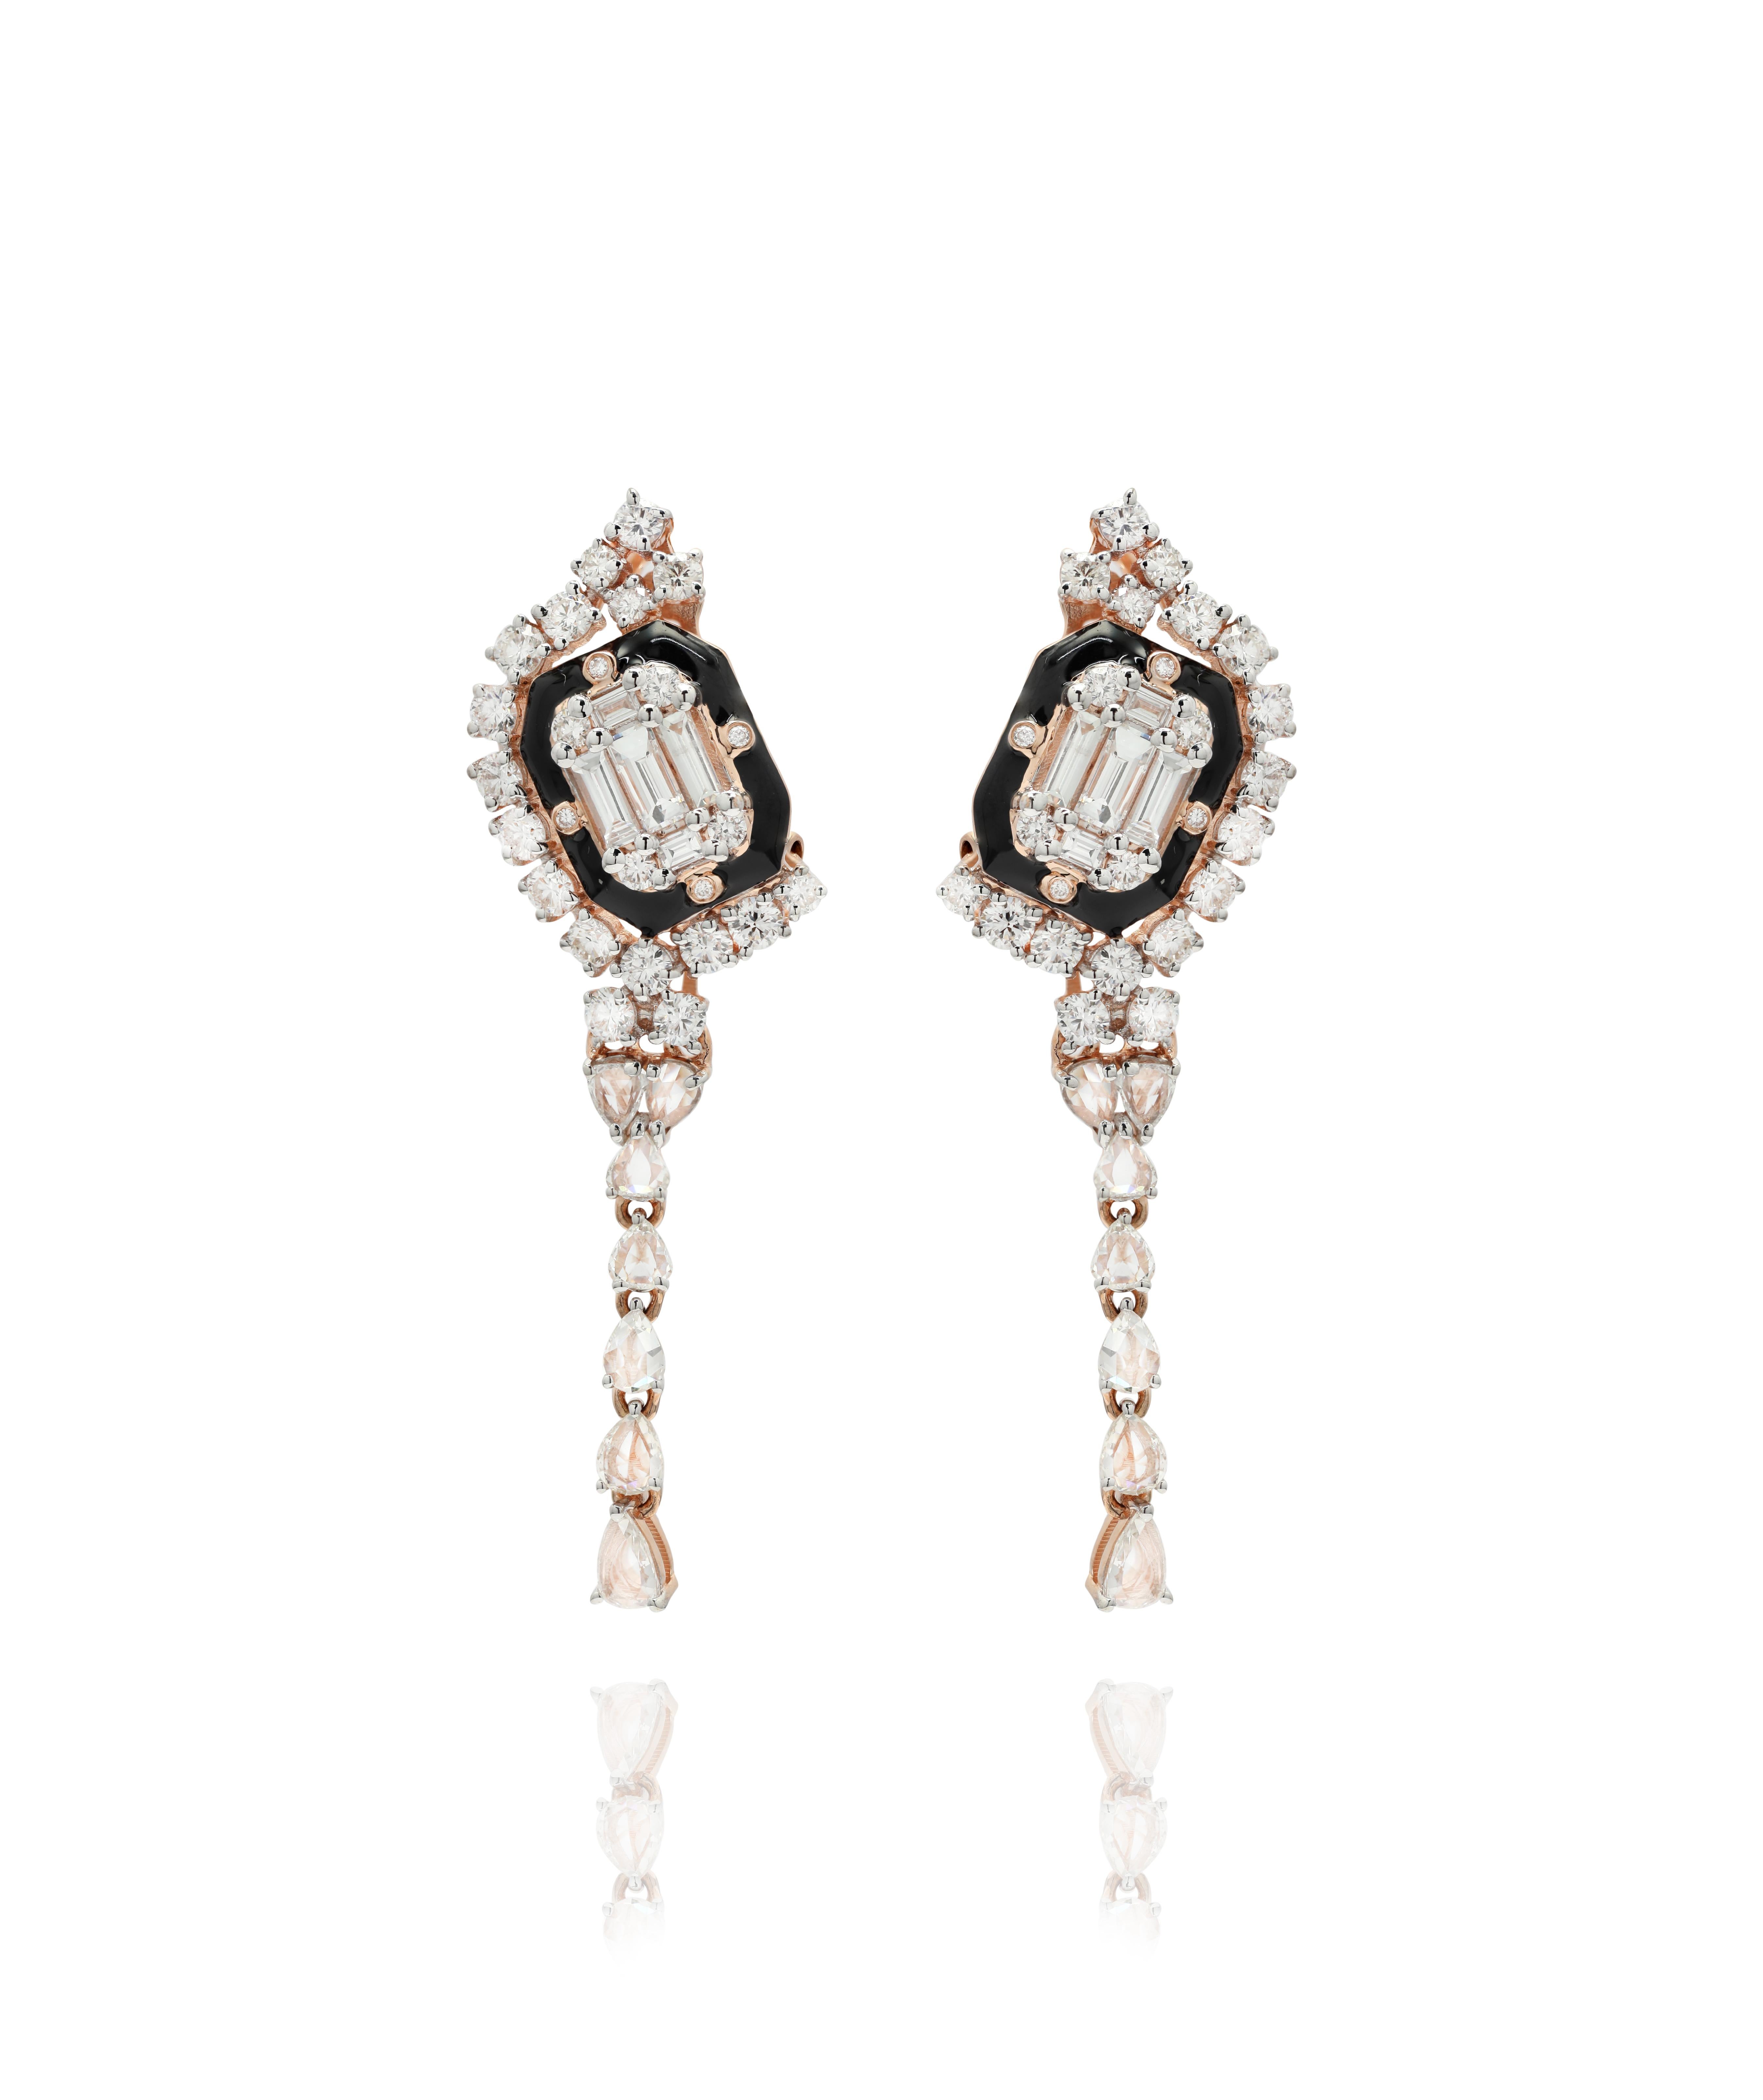 Diamond Dangle Cocktail Earrings to make a statement with your look. These earrings create a sparkling, luxurious look featuring mix cut diamonds.
April birthstone diamond brings love, fame, success and prosperity.
If you love to gravitate towards